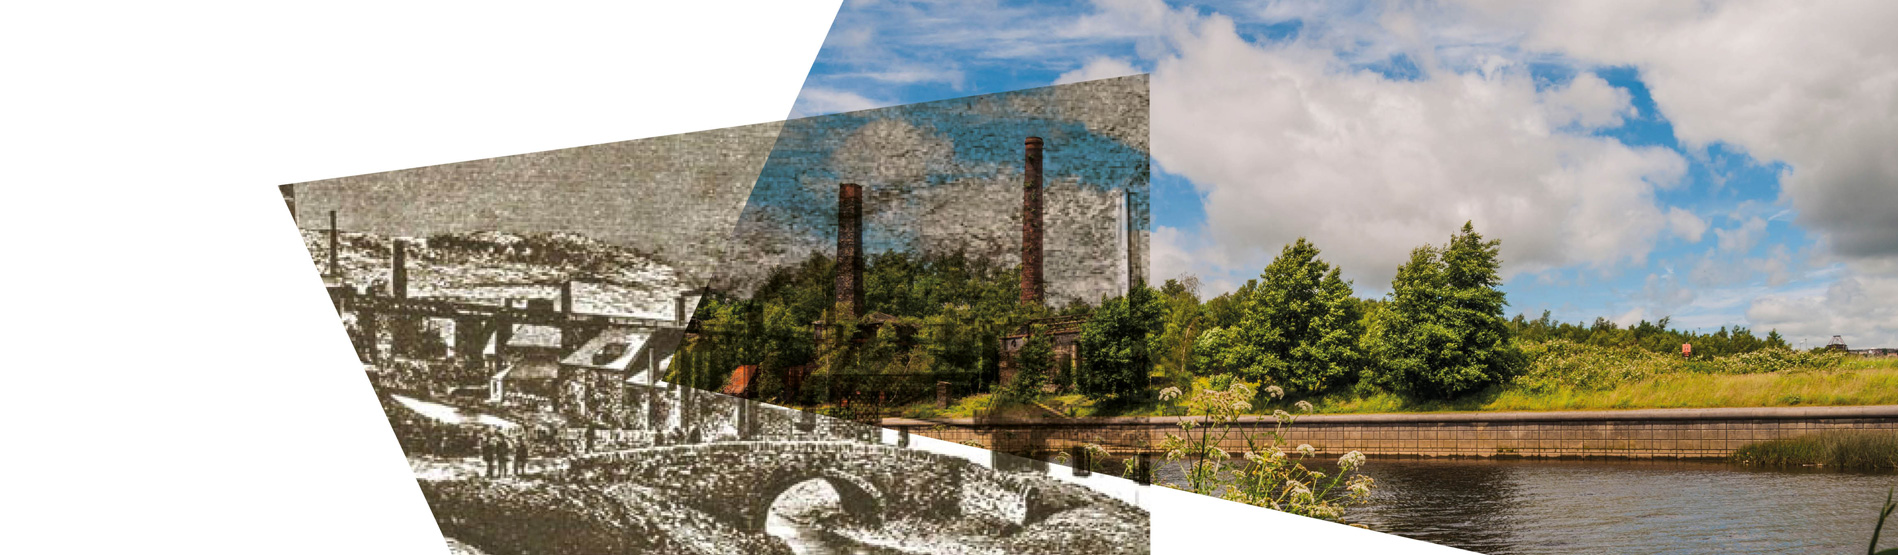 Copperopolis Reborn: A historic global industry, place-making and heritage-led regeneration